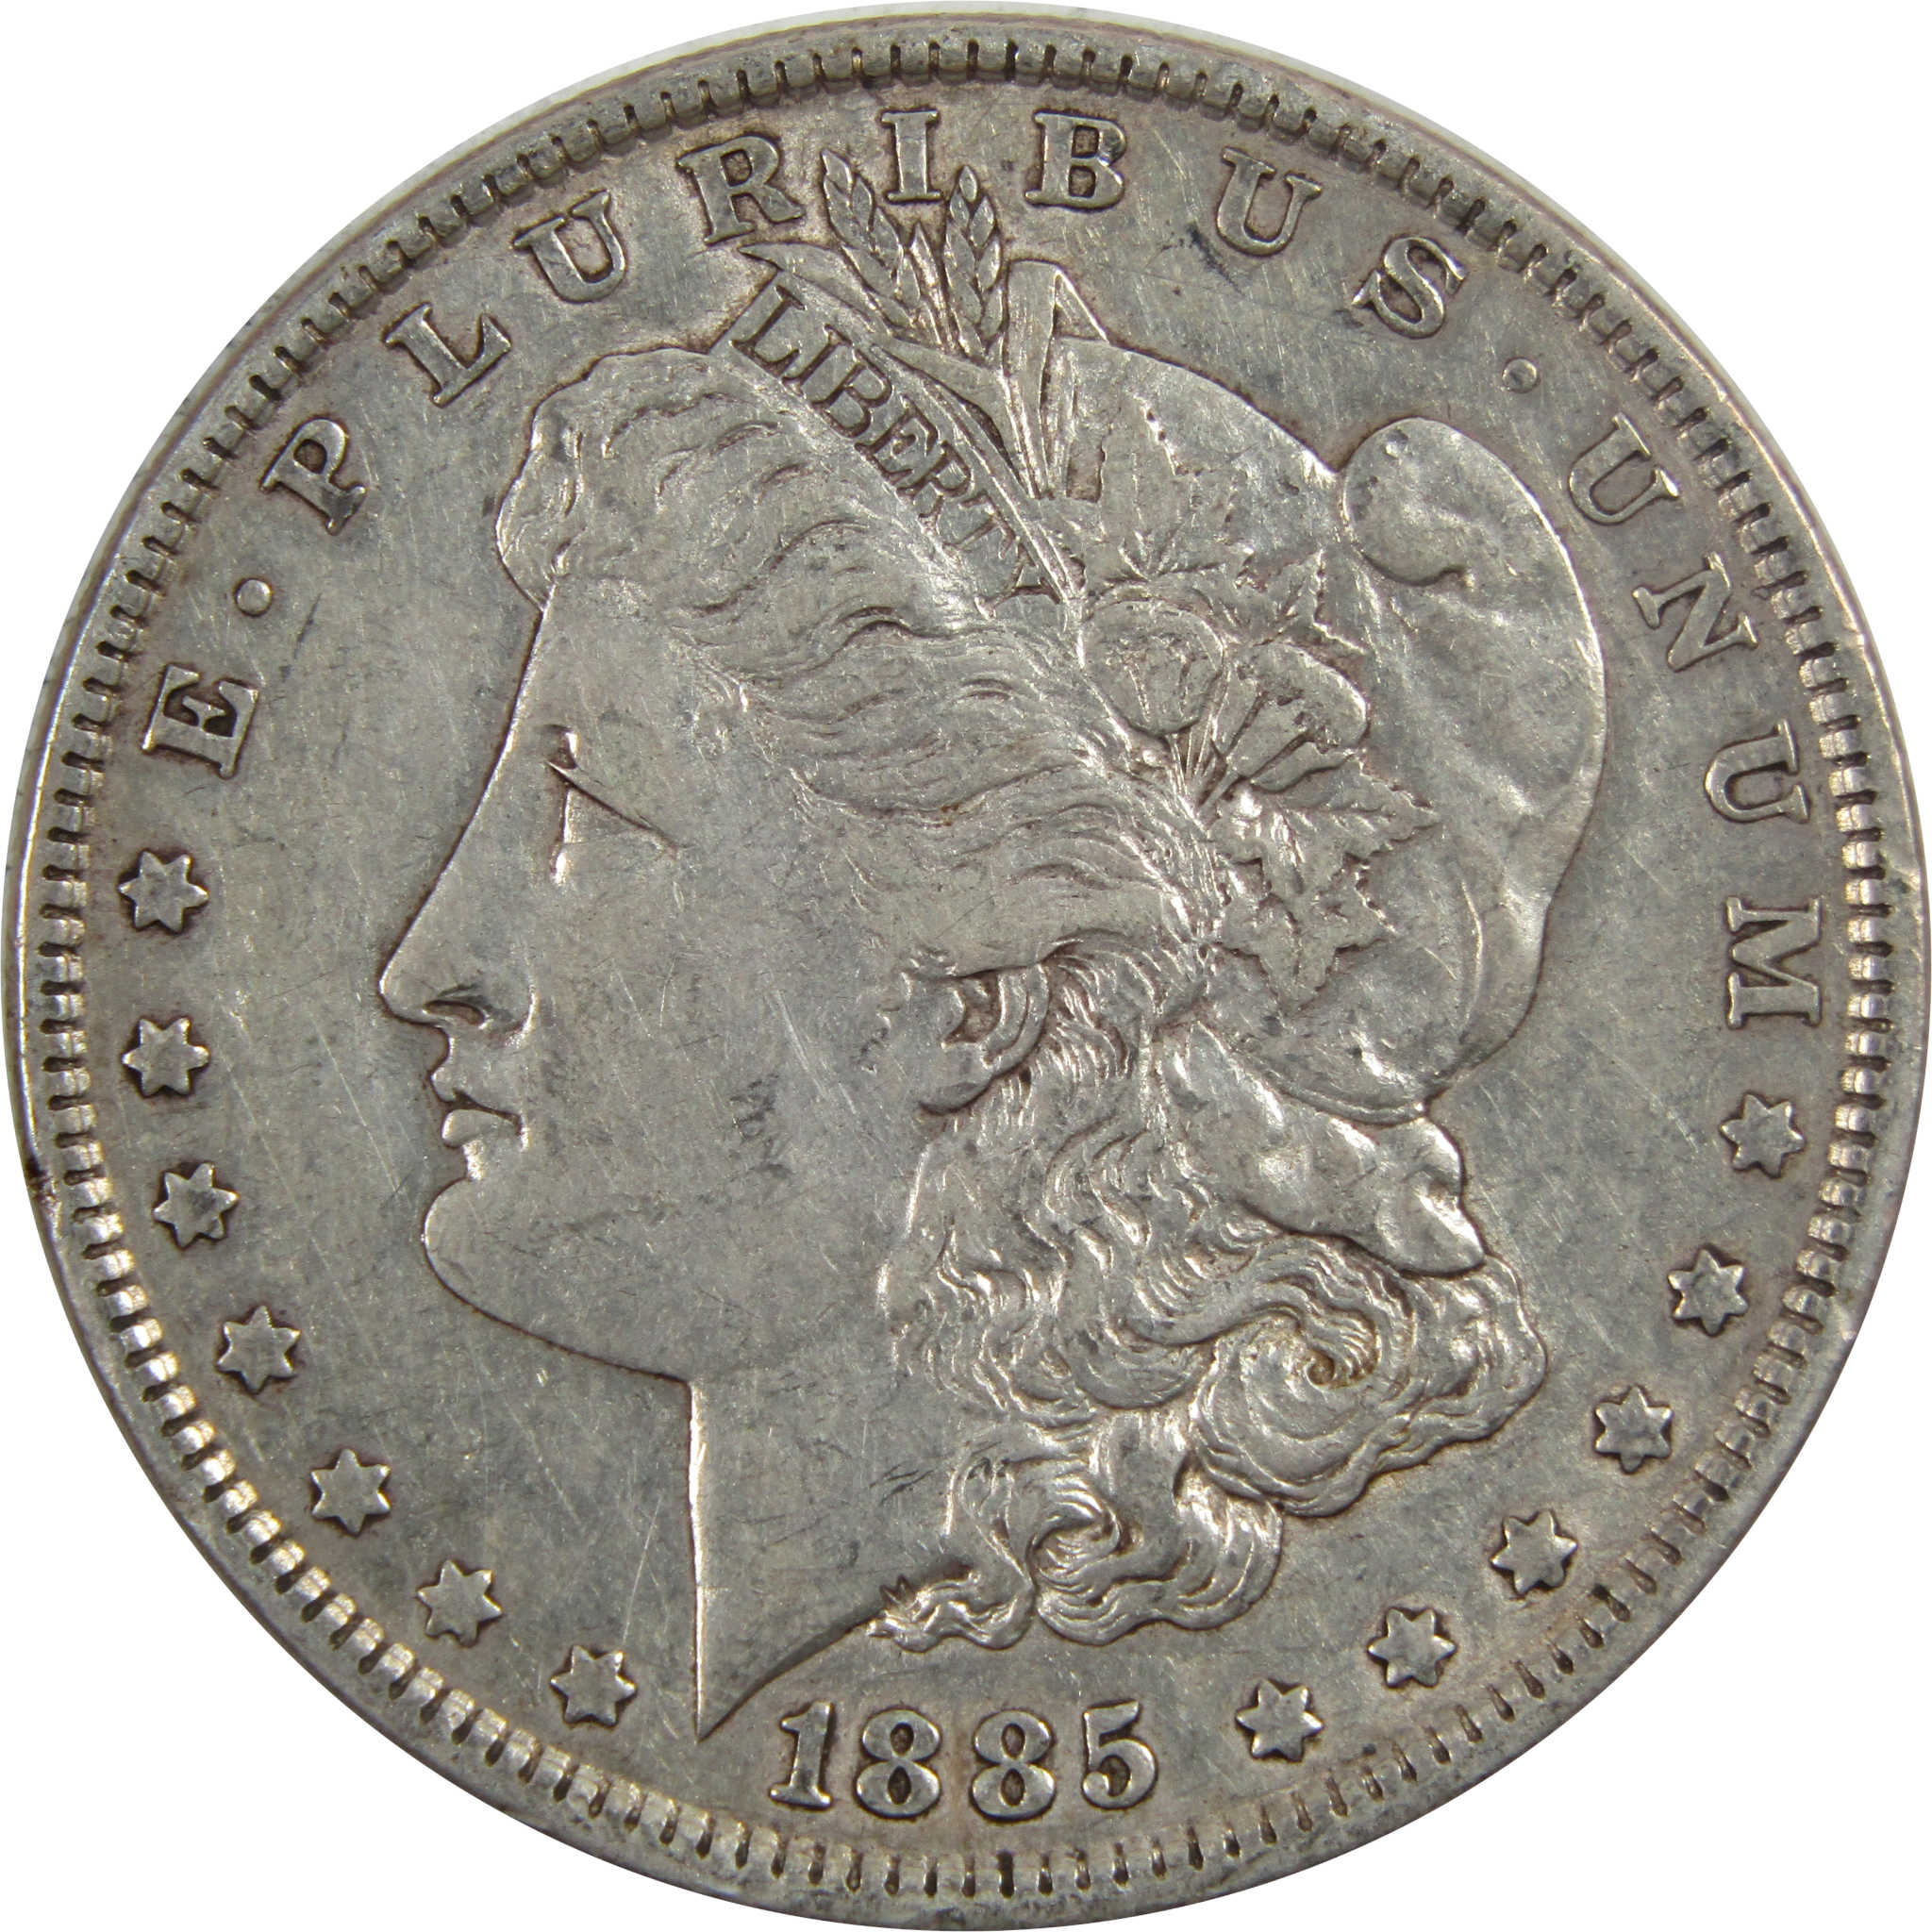 1885 Morgan Dollar XF EF Extremely Fine 90% Silver $1 Coin SKU:I5558 - Morgan coin - Morgan silver dollar - Morgan silver dollar for sale - Profile Coins &amp; Collectibles